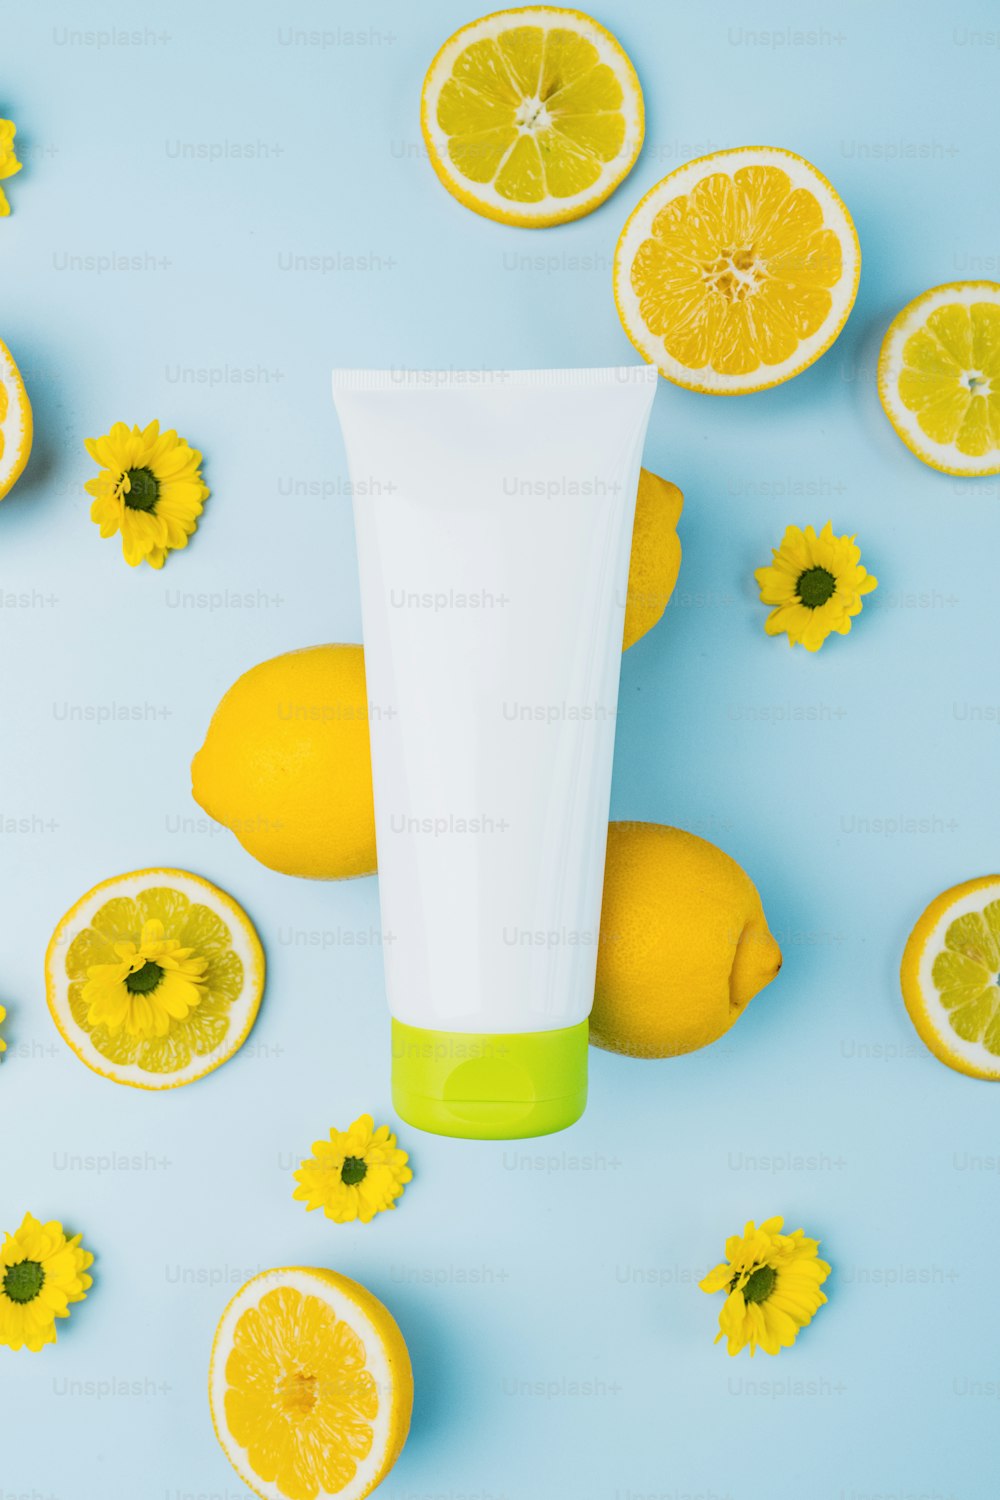 a tube of lotion surrounded by lemons and flowers